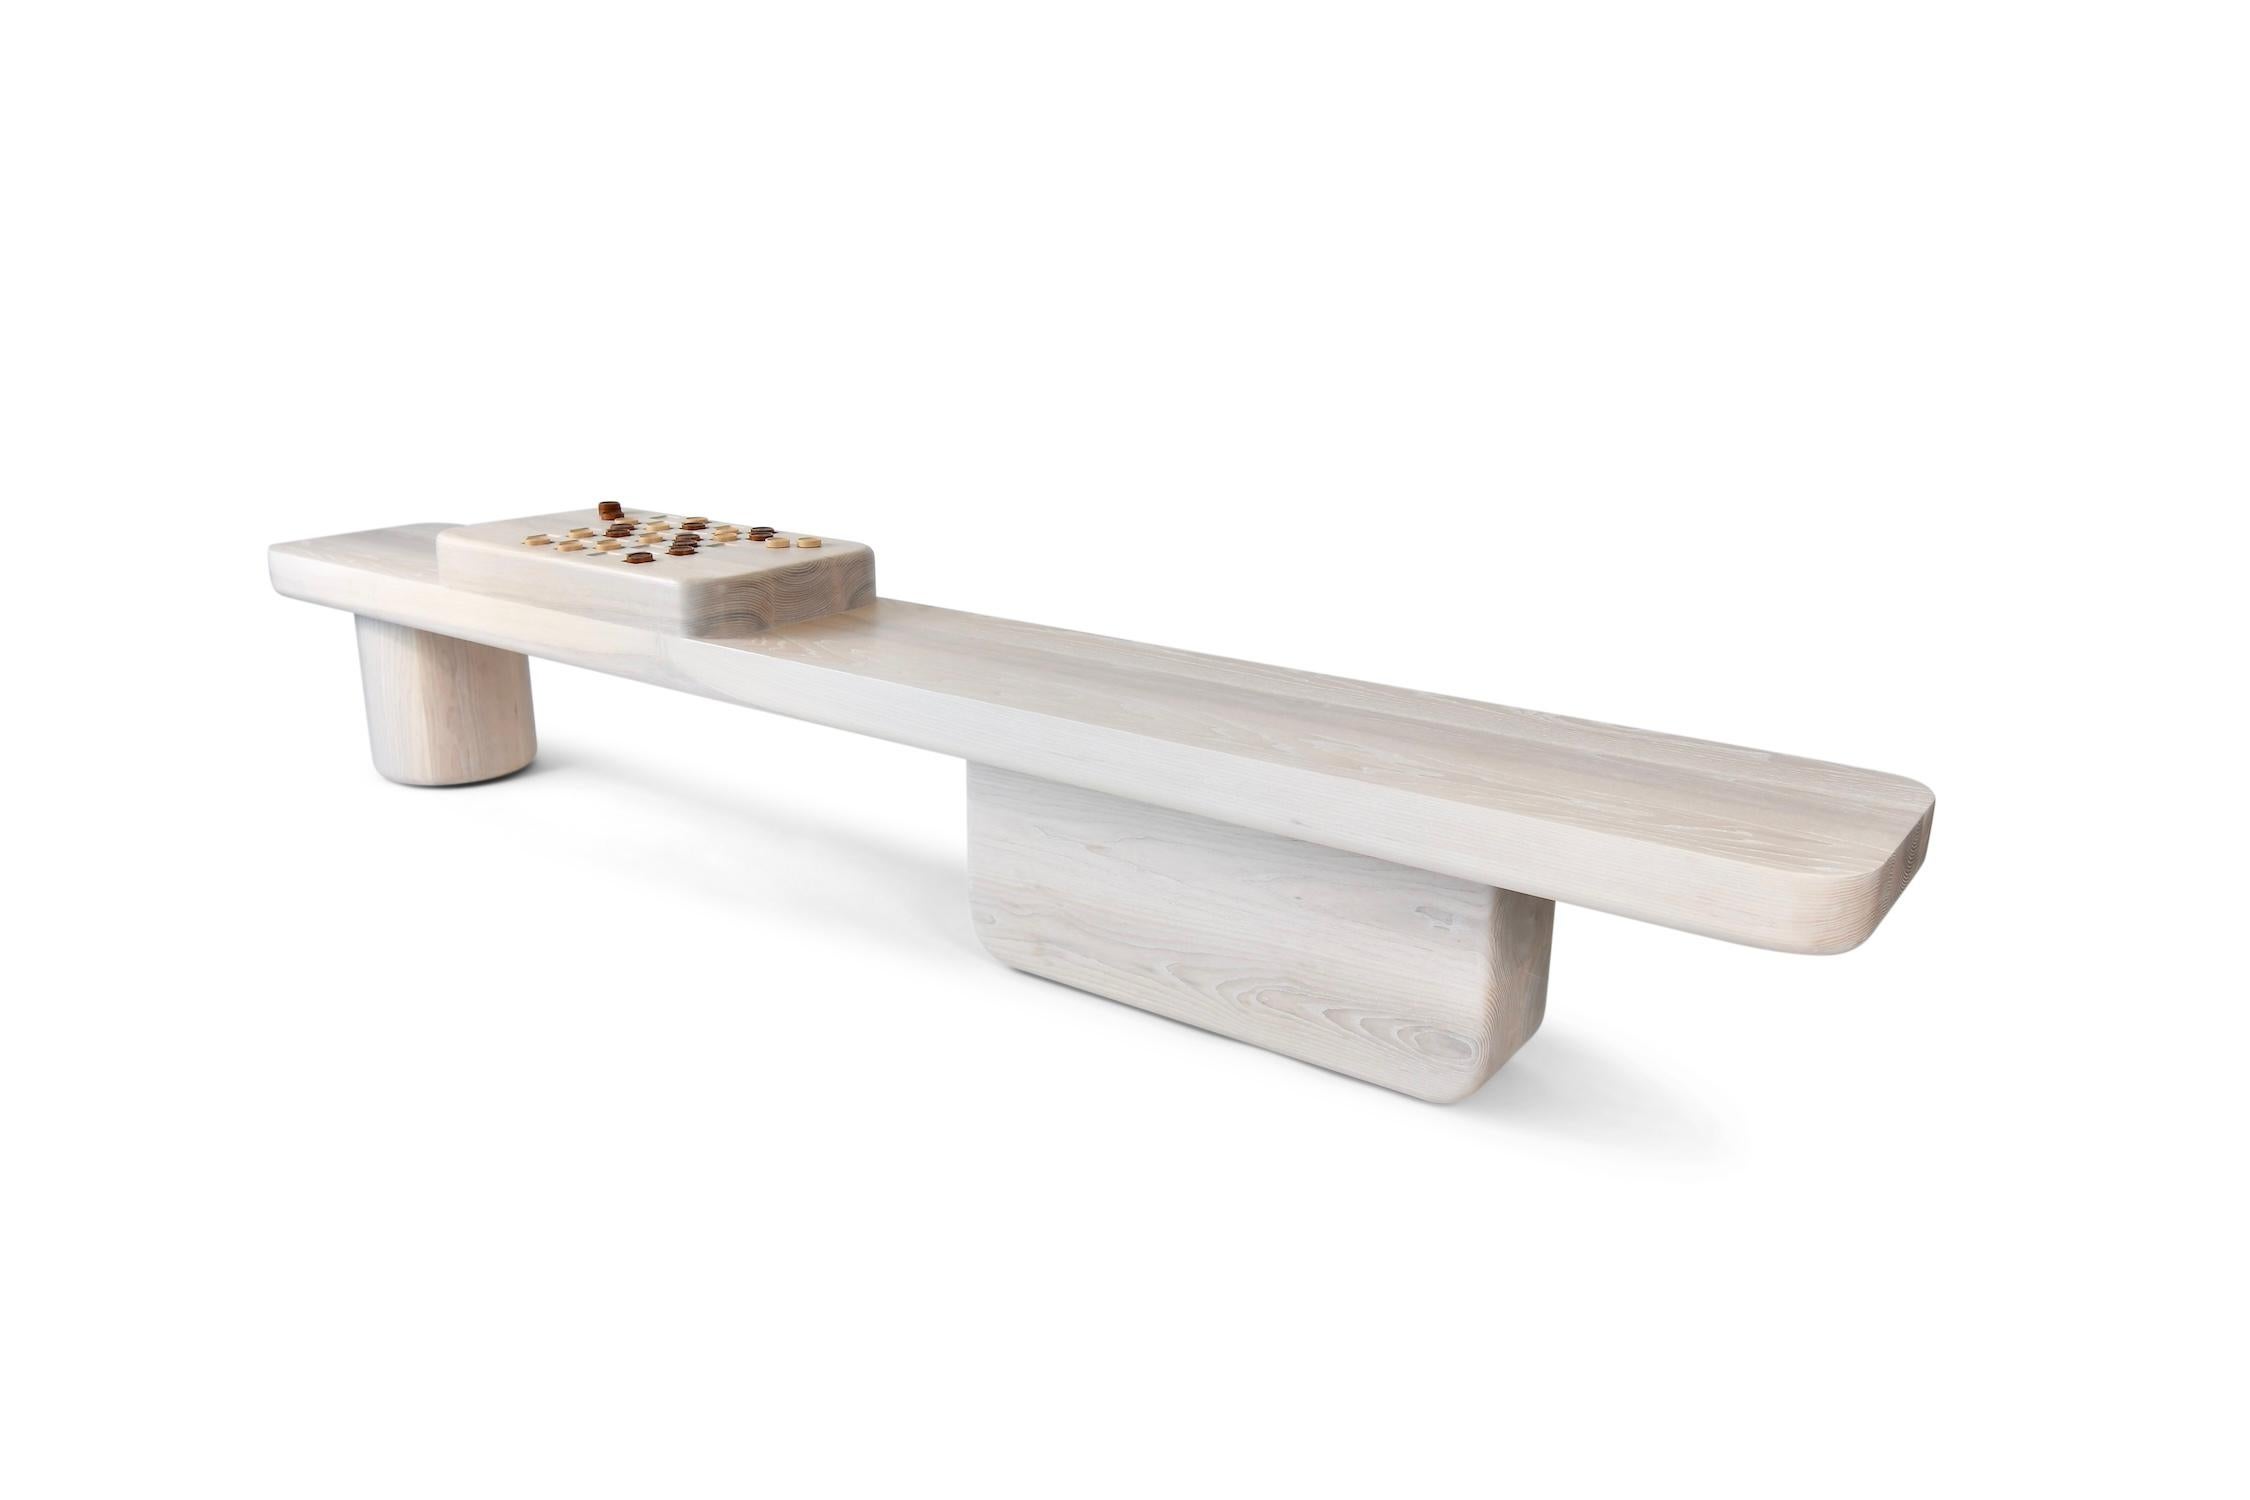 The Nostromo Bench is a monolithic solid wood slab top anchored by a large sculpted rectangular base and round column. This statement piece features an integrated chess/ checkerboard that harkens back to an earlier time. 

The game table engages the